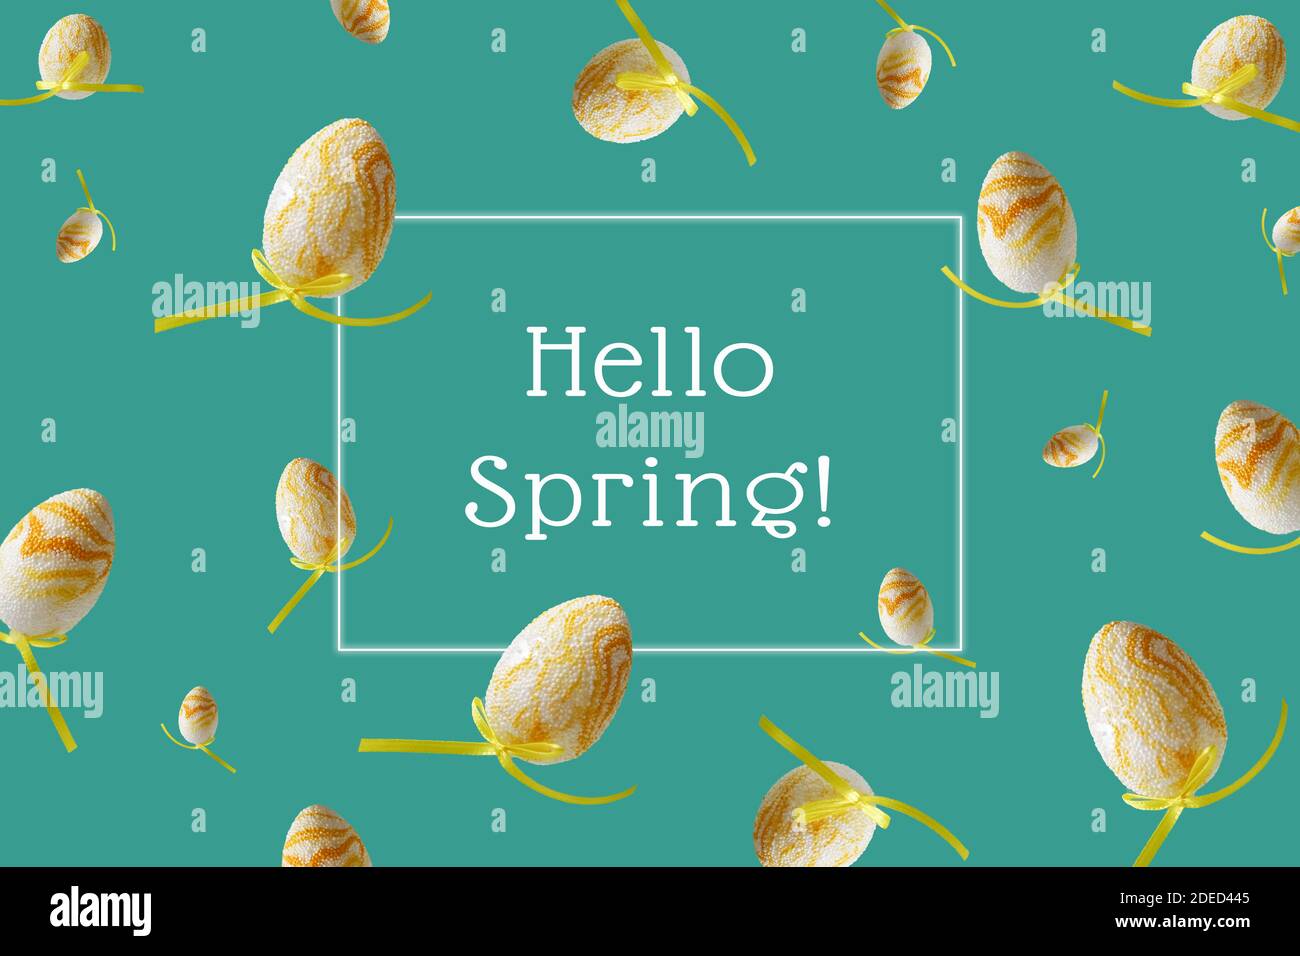 Hello spring hand lettering. Winter pattern with flying yellow eggs on turquoise background. Zero gravity concept. Stock Photo